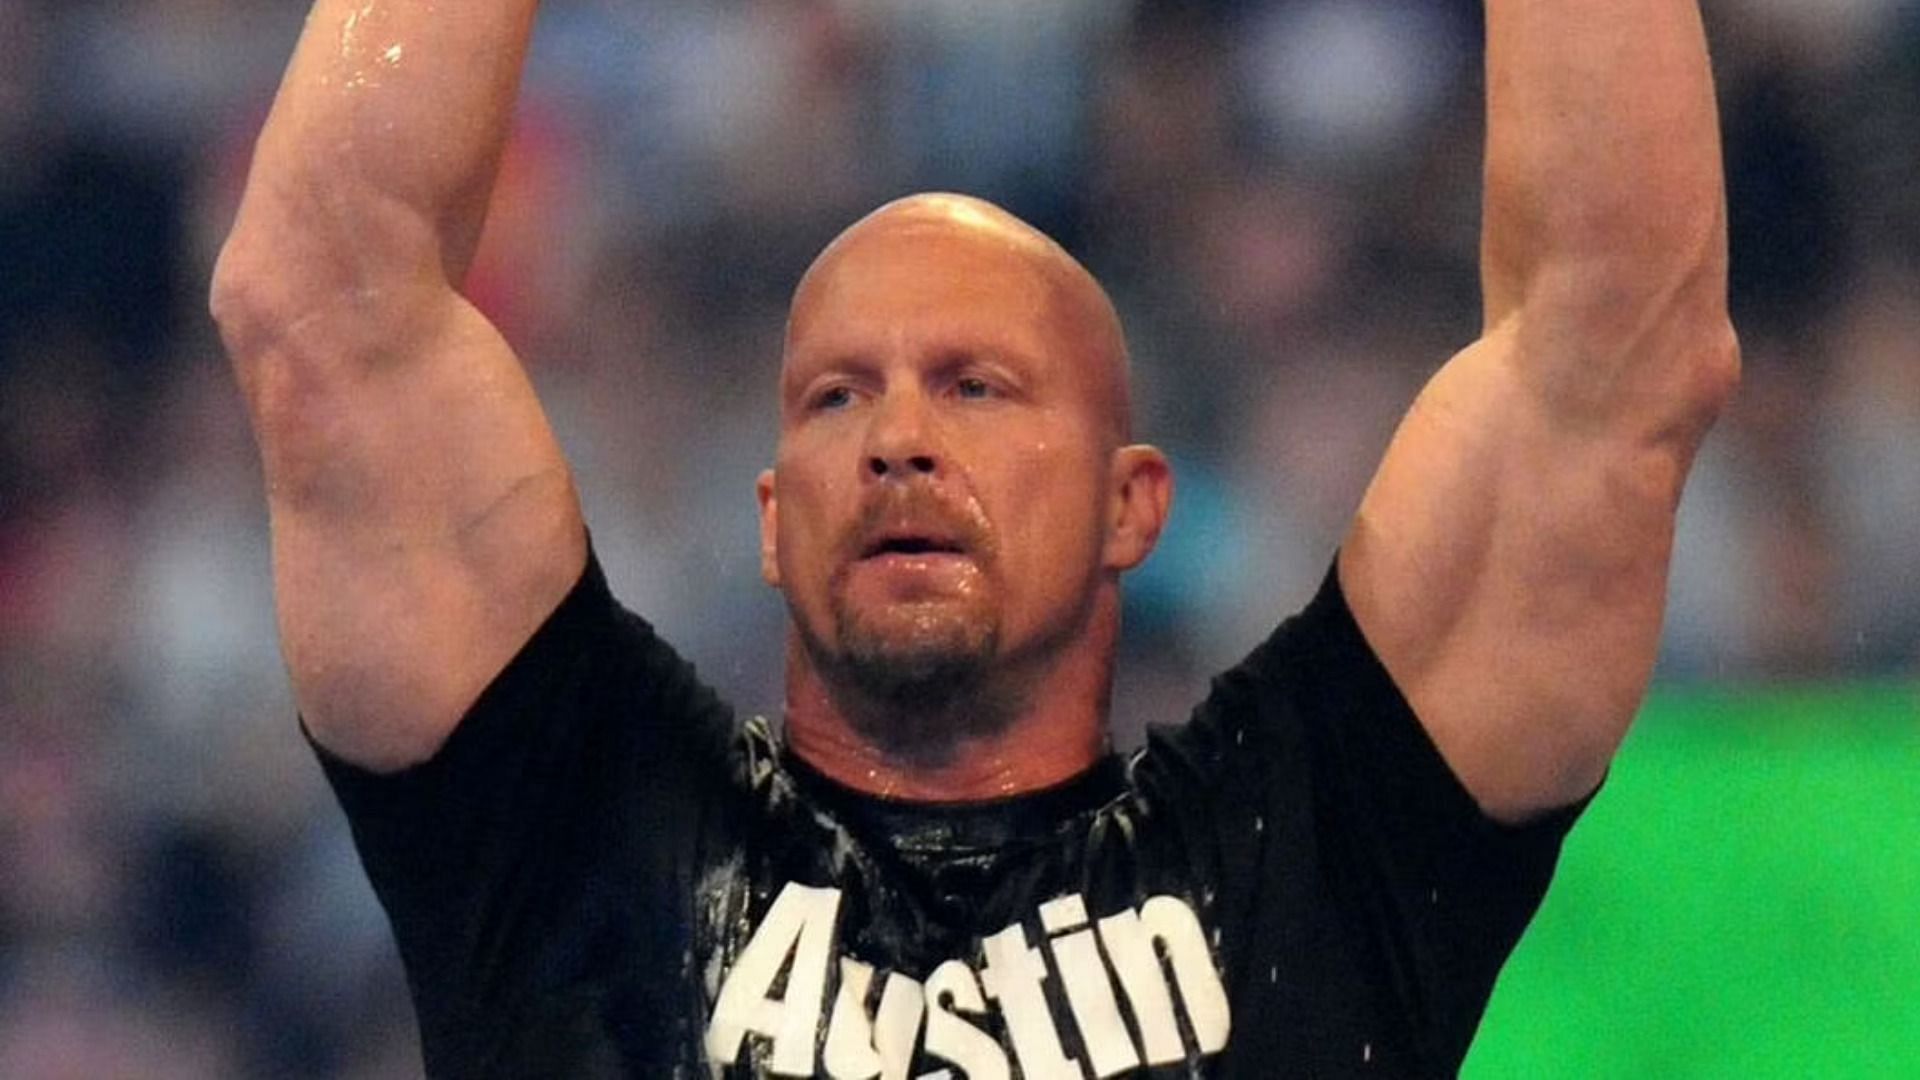 Stone Cold Steve Austin will return to WWE at WrestleMania